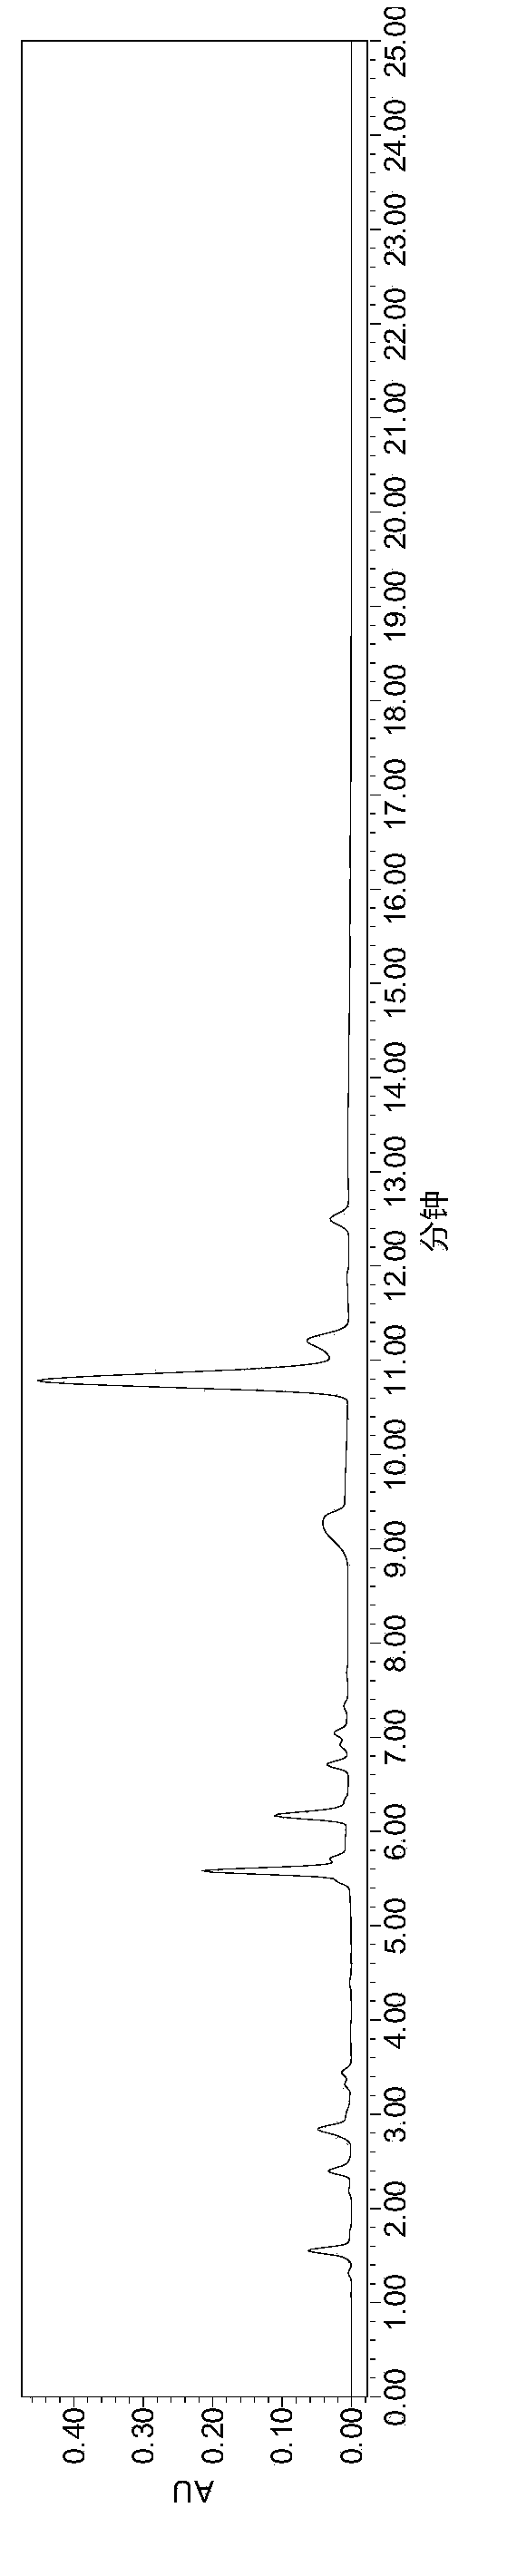 Method for quickly detecting heparin disaccharide content in heparin and/or low-molecular heparin